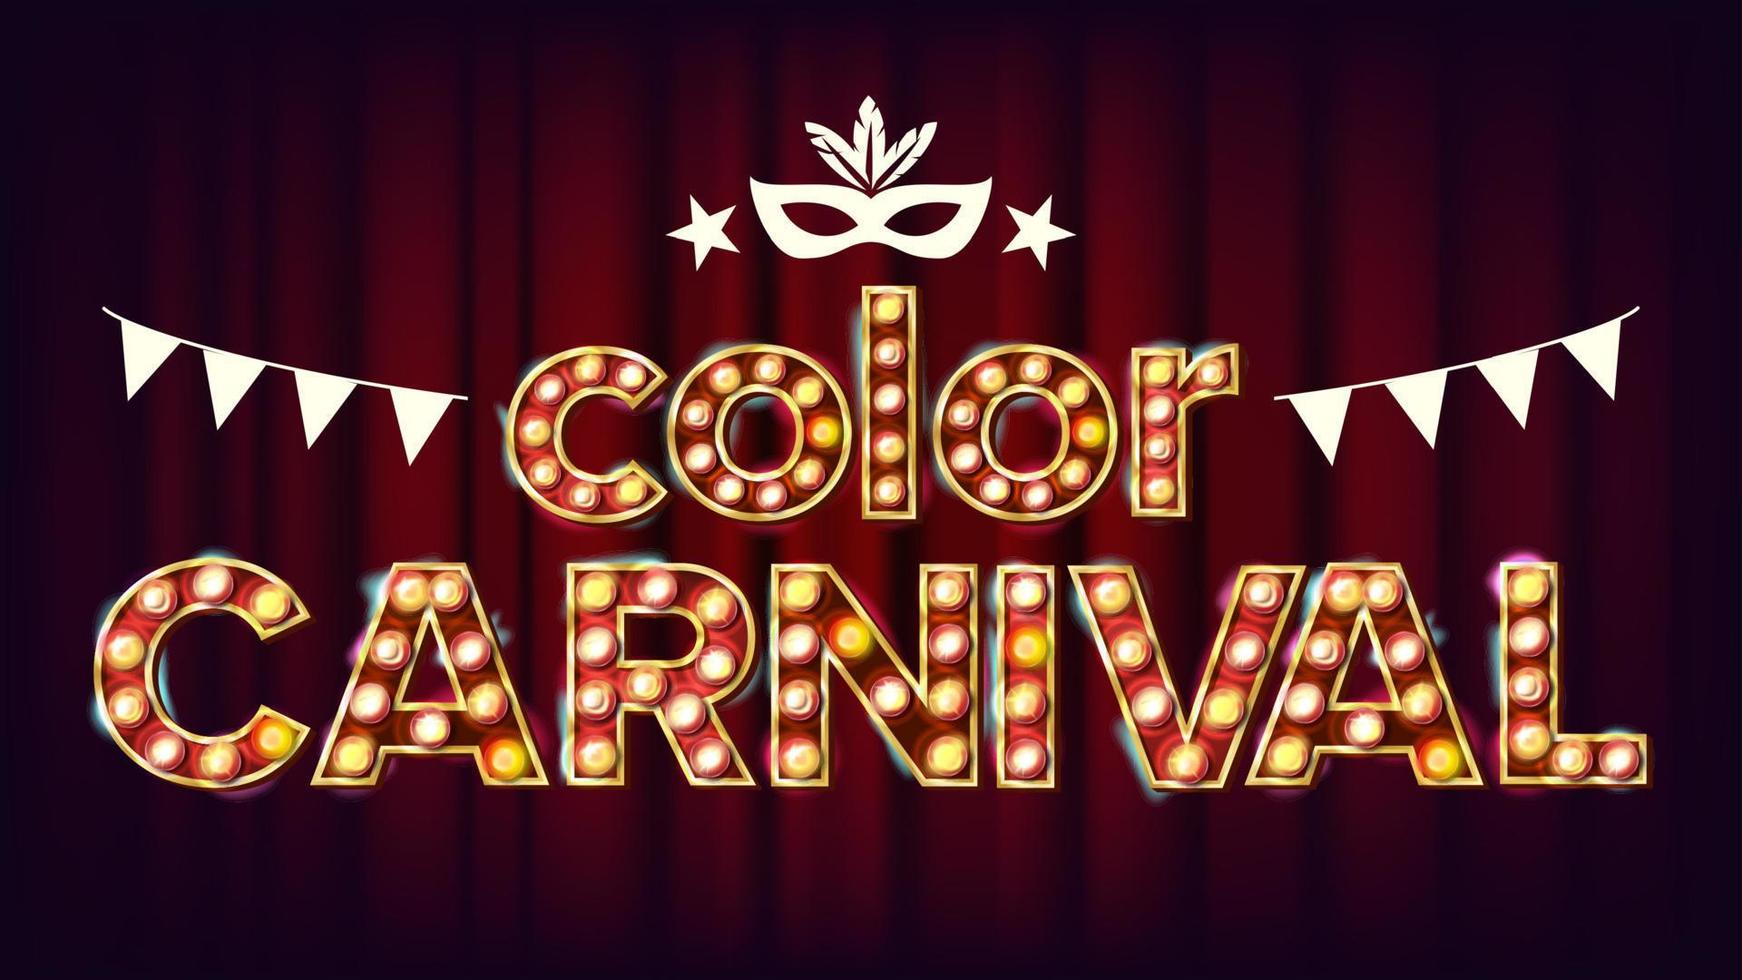 Color Carnival Poster Vector. Carnival 3D Glowing Element. For Masquerade Advertising Design. Retro Illustration vector